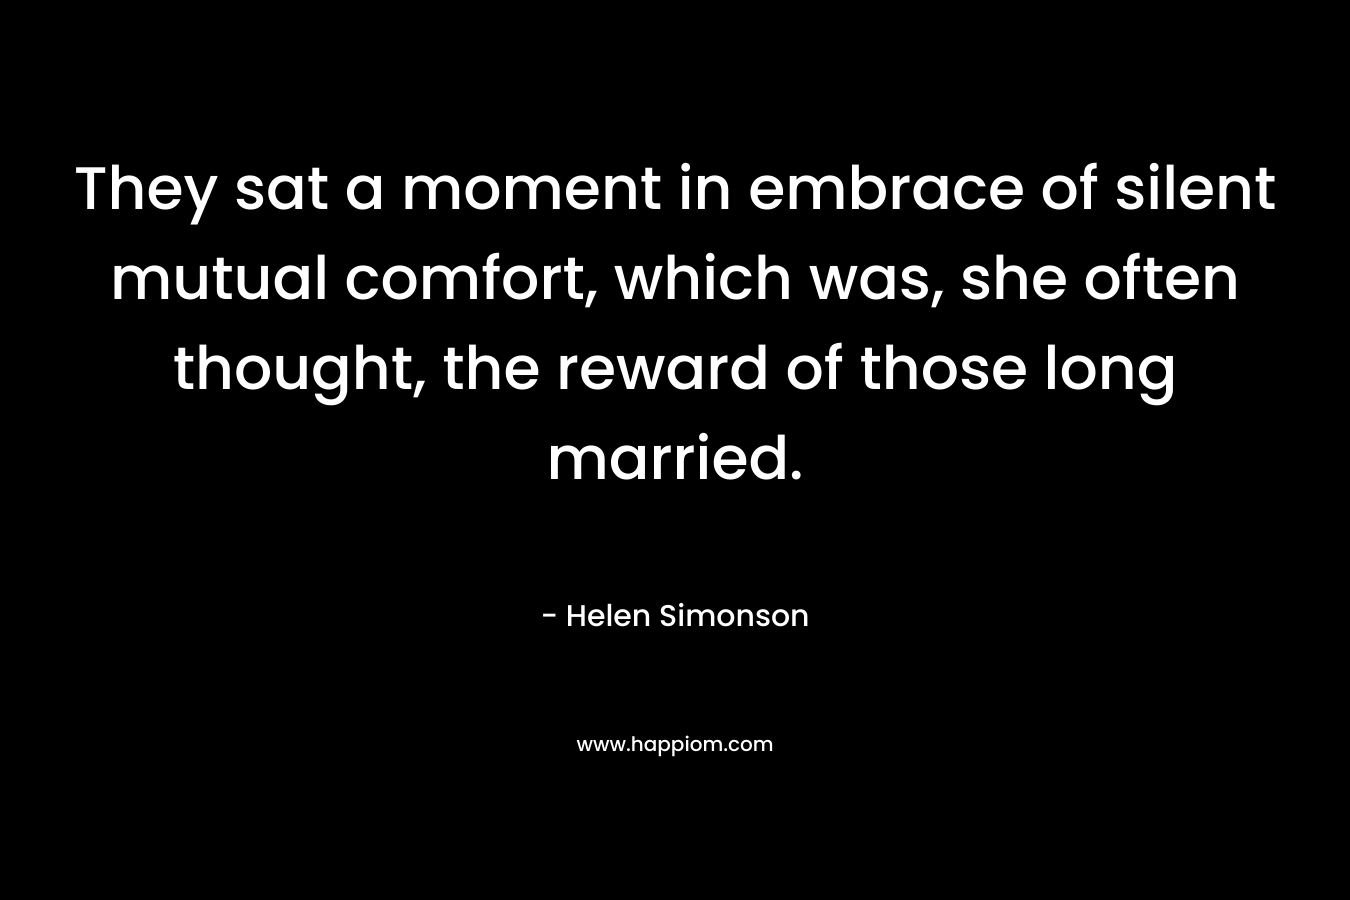 They sat a moment in embrace of silent mutual comfort, which was, she often thought, the reward of those long married. – Helen Simonson